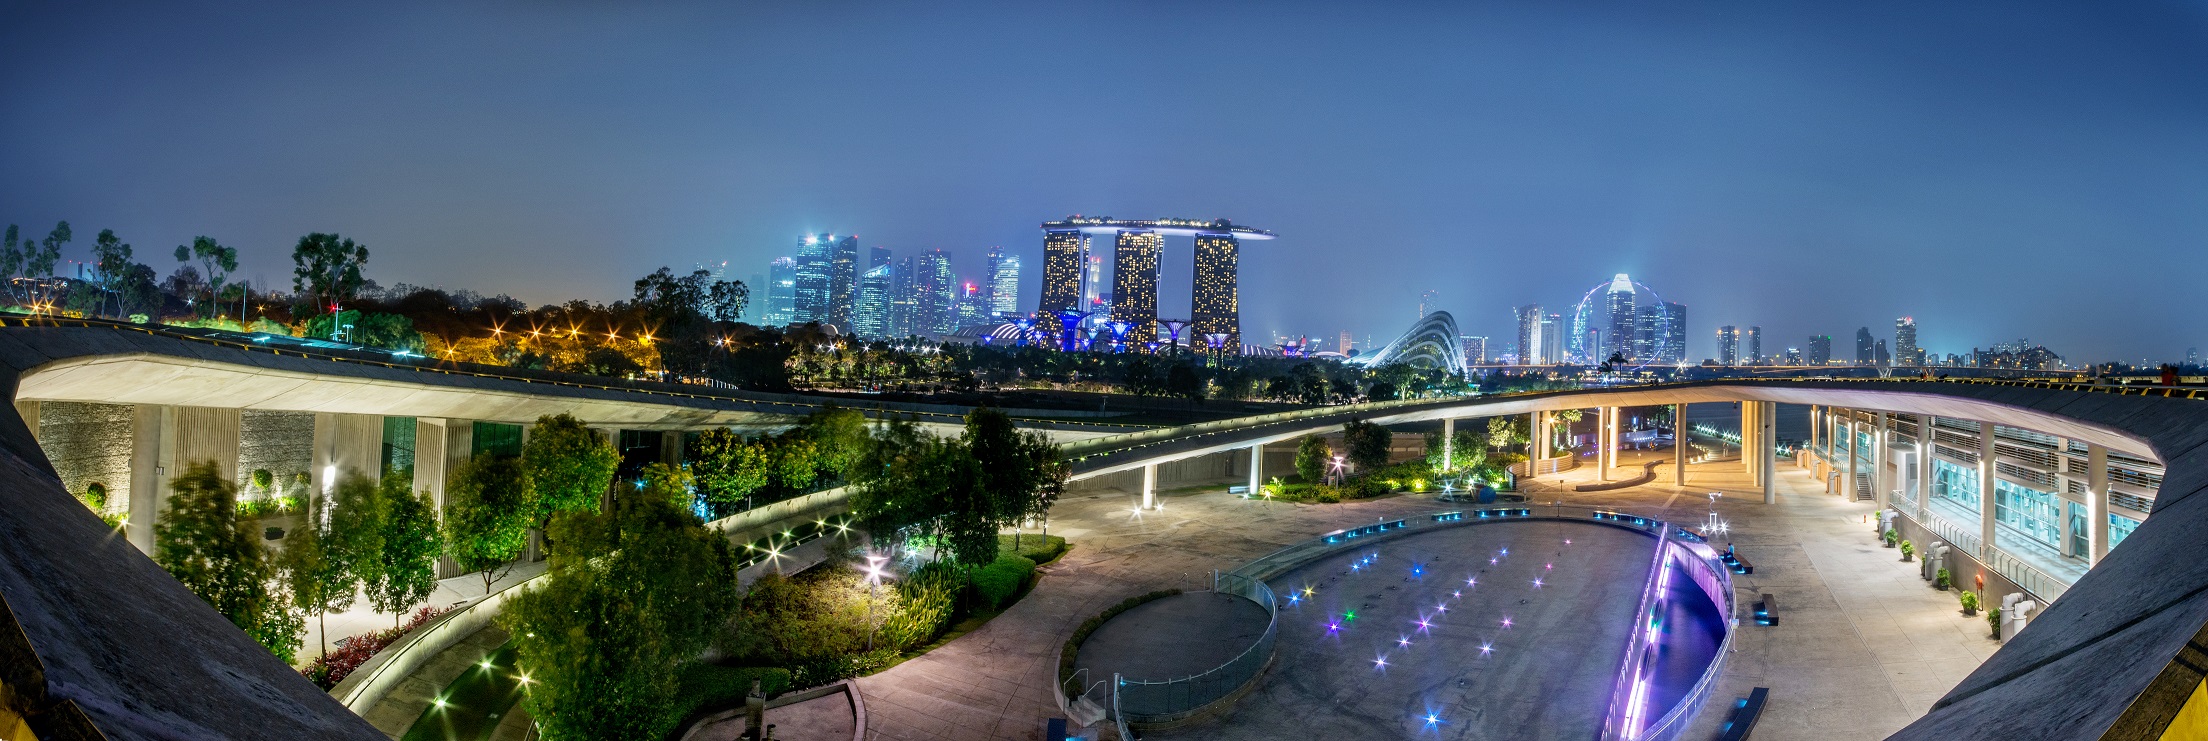 A night shot of Marina Barrage with Marina Bay Sands, Flowers Dome and the Marina Bay buildings.